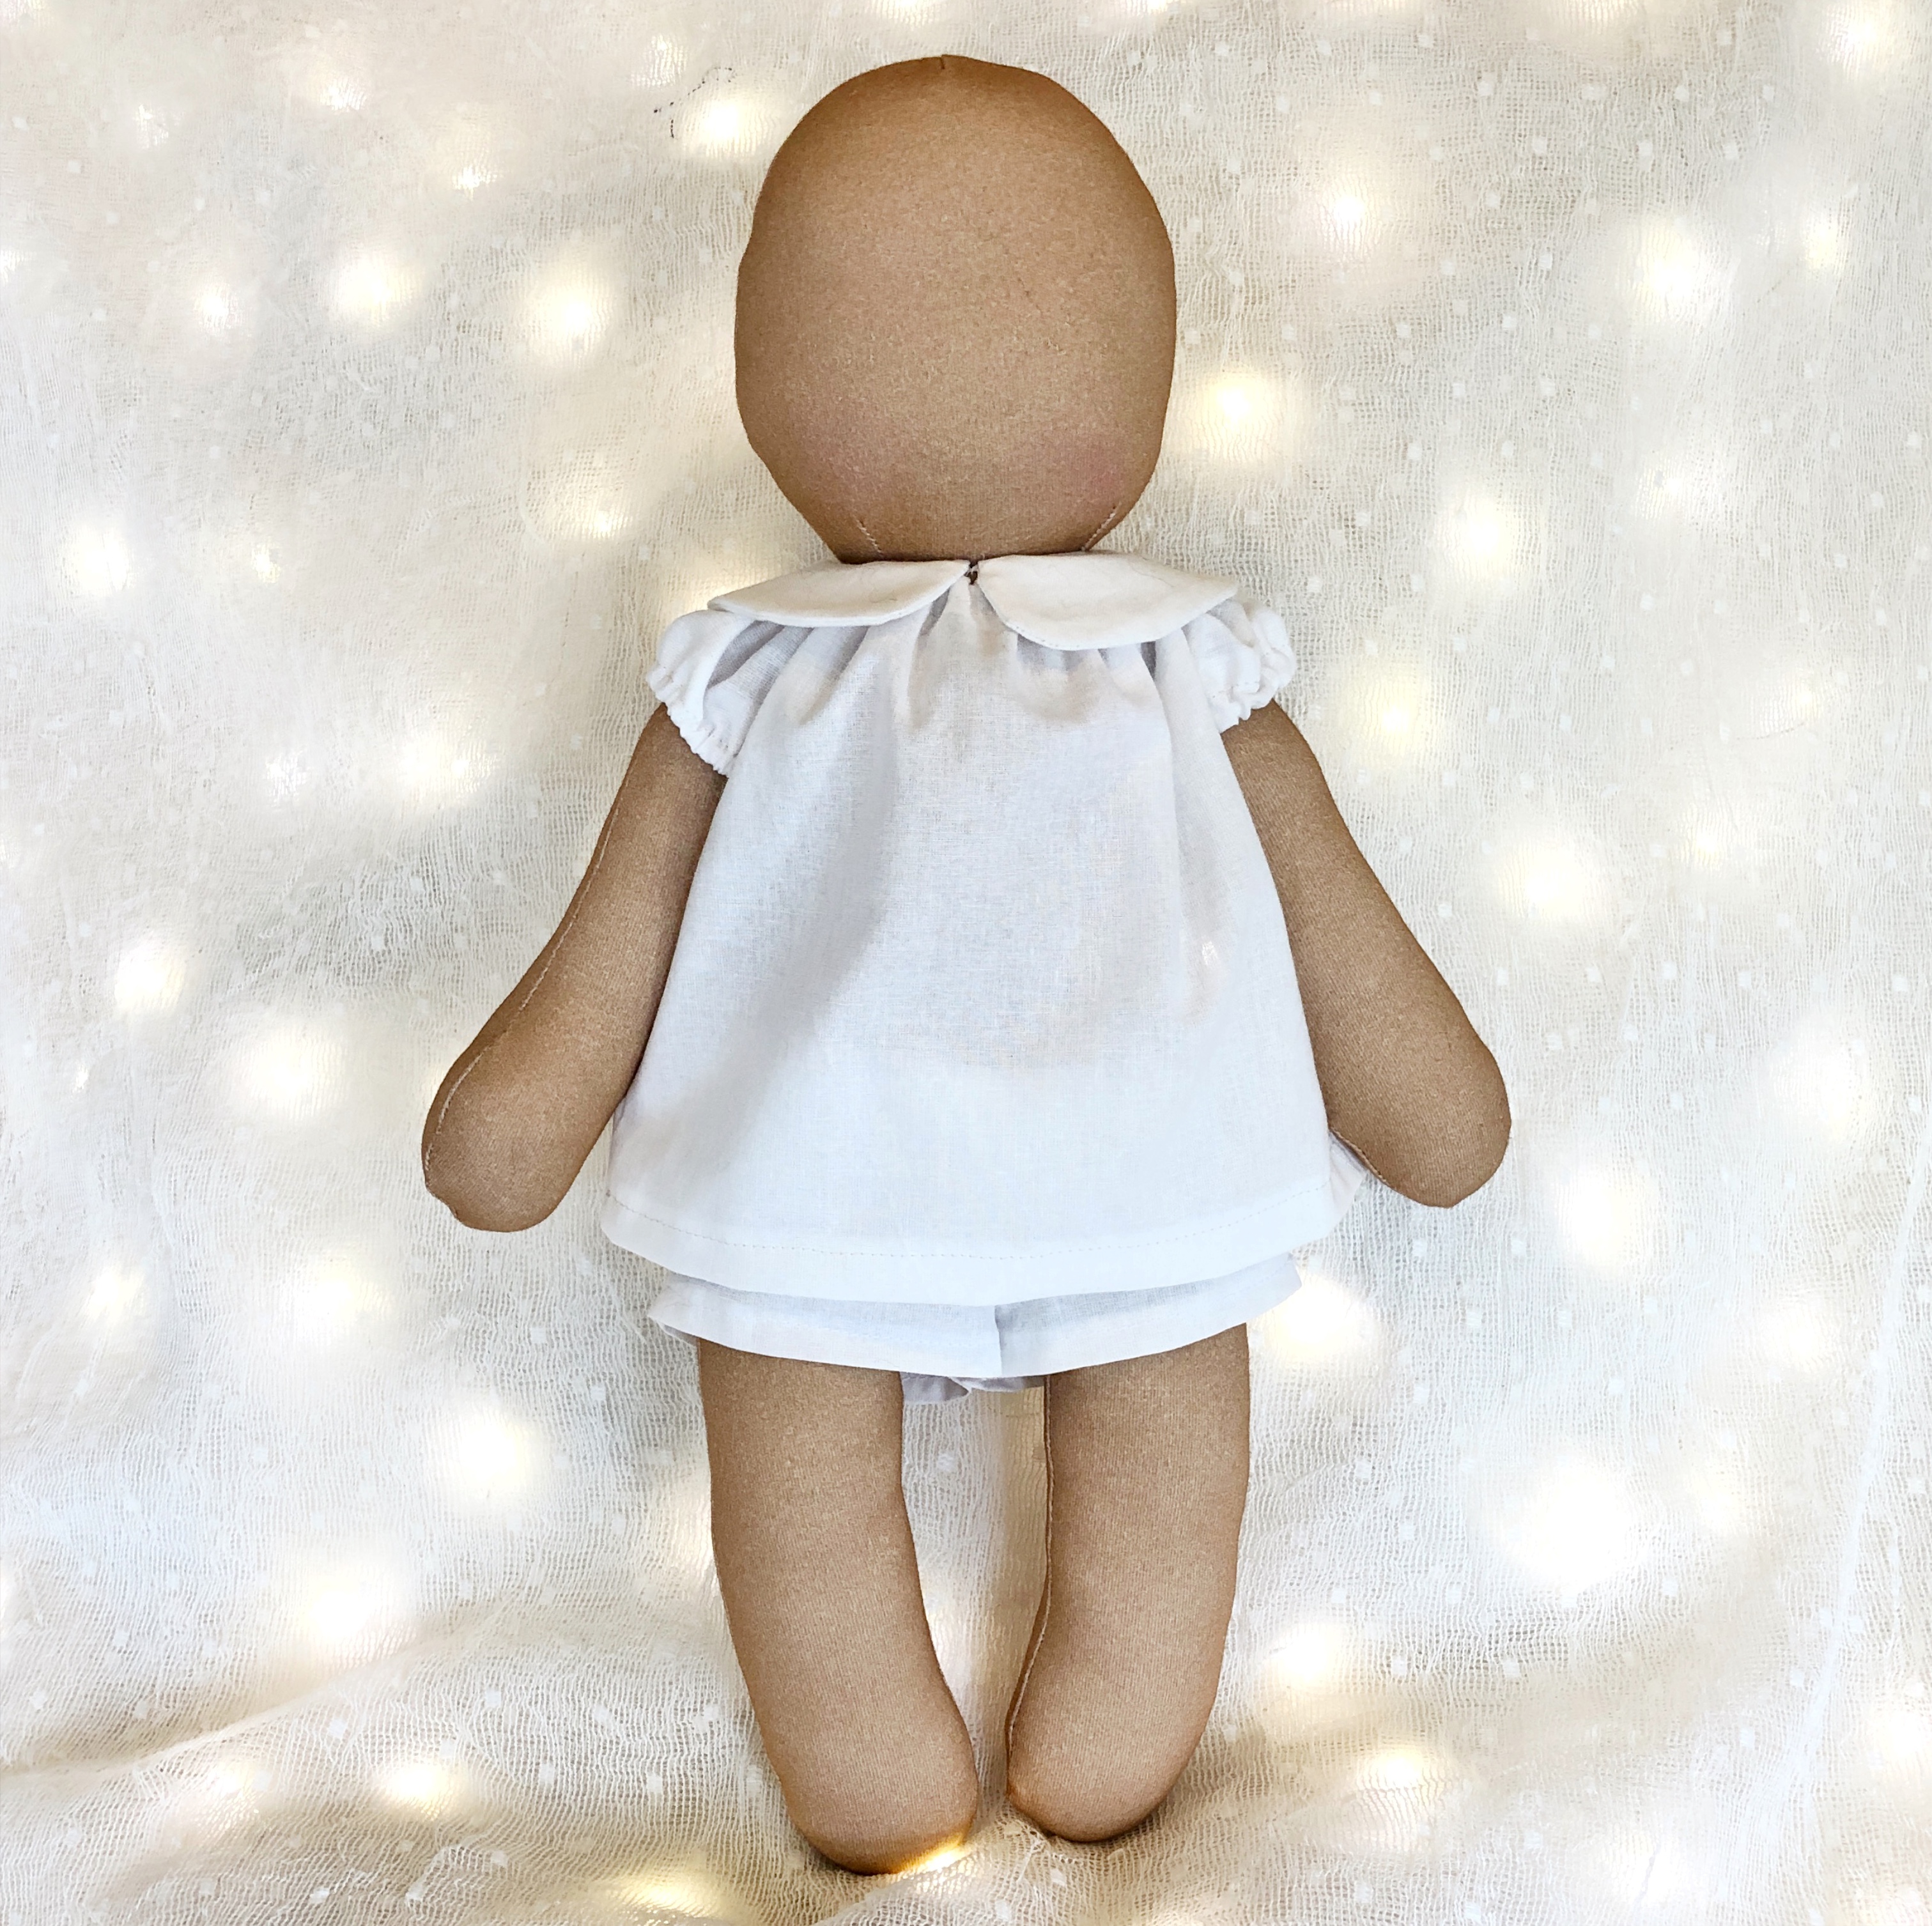 CLOTH DOLL DESIGN: Create yours!